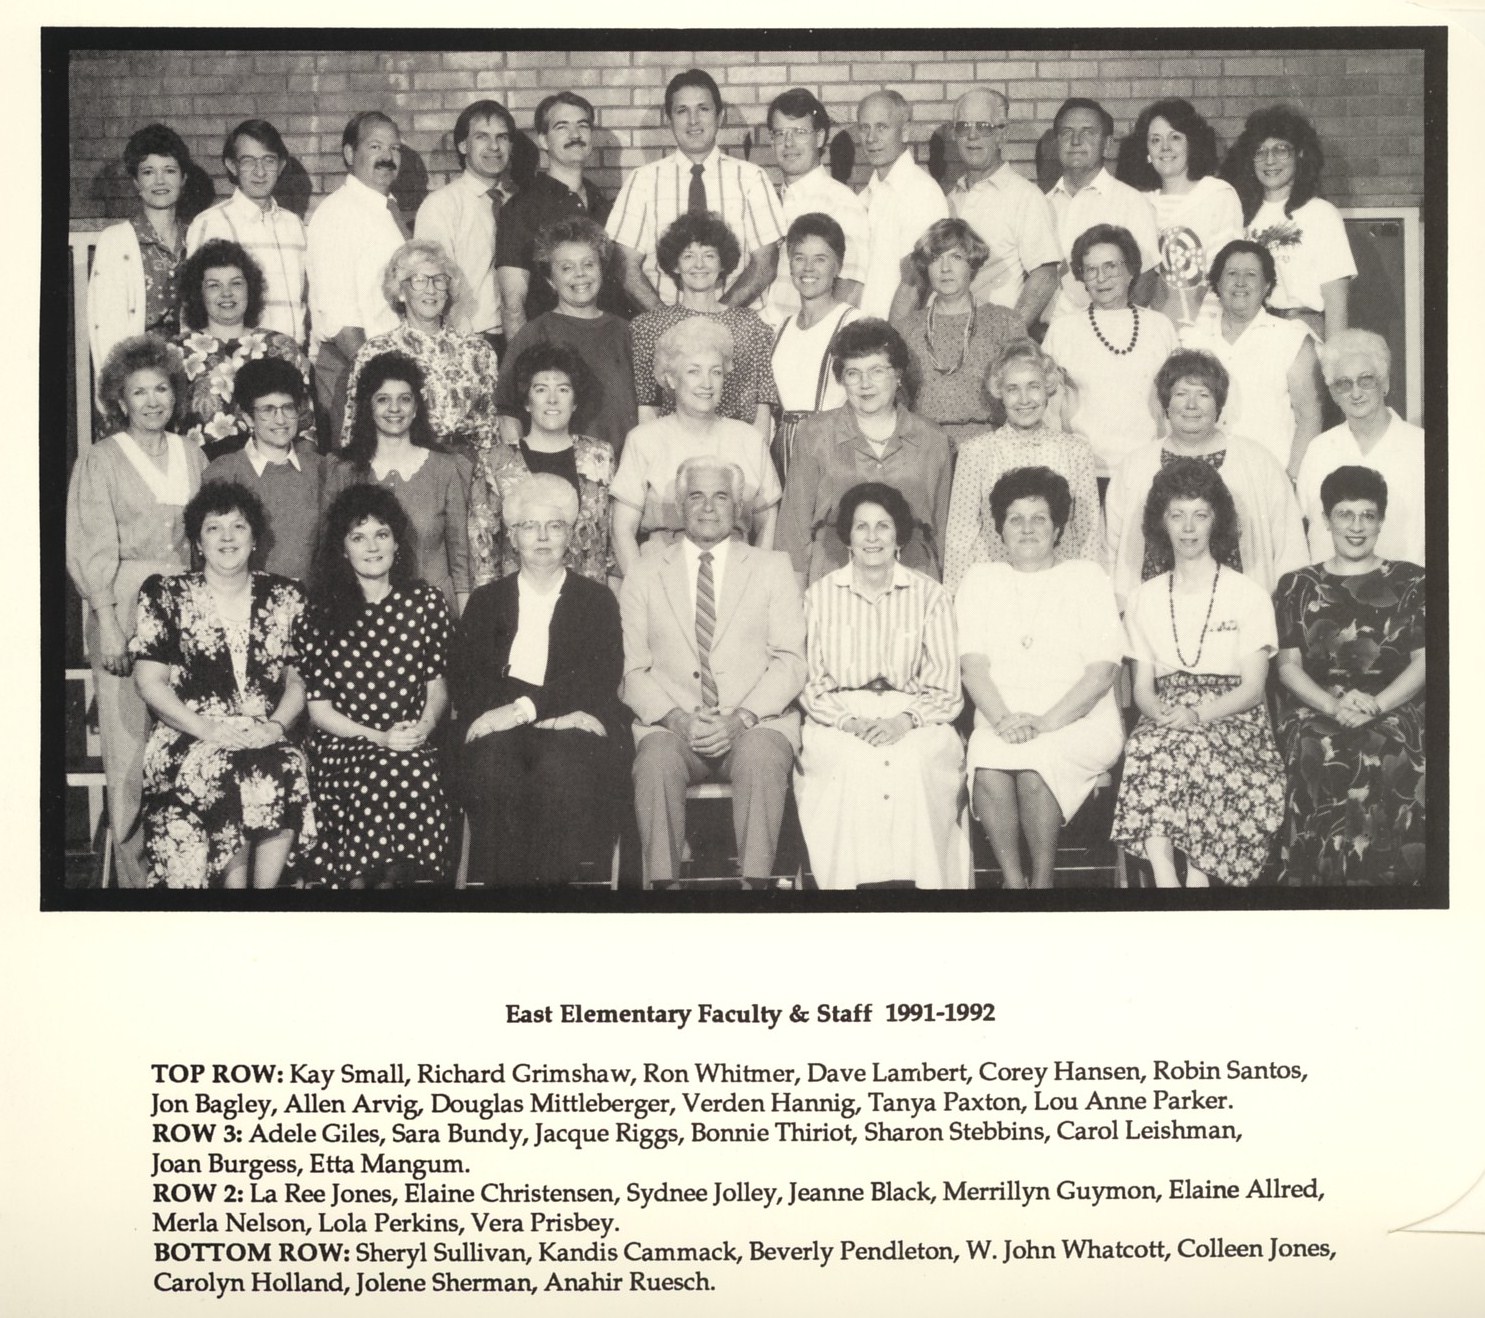 1991-1992 faculty & staff at East Elementary School